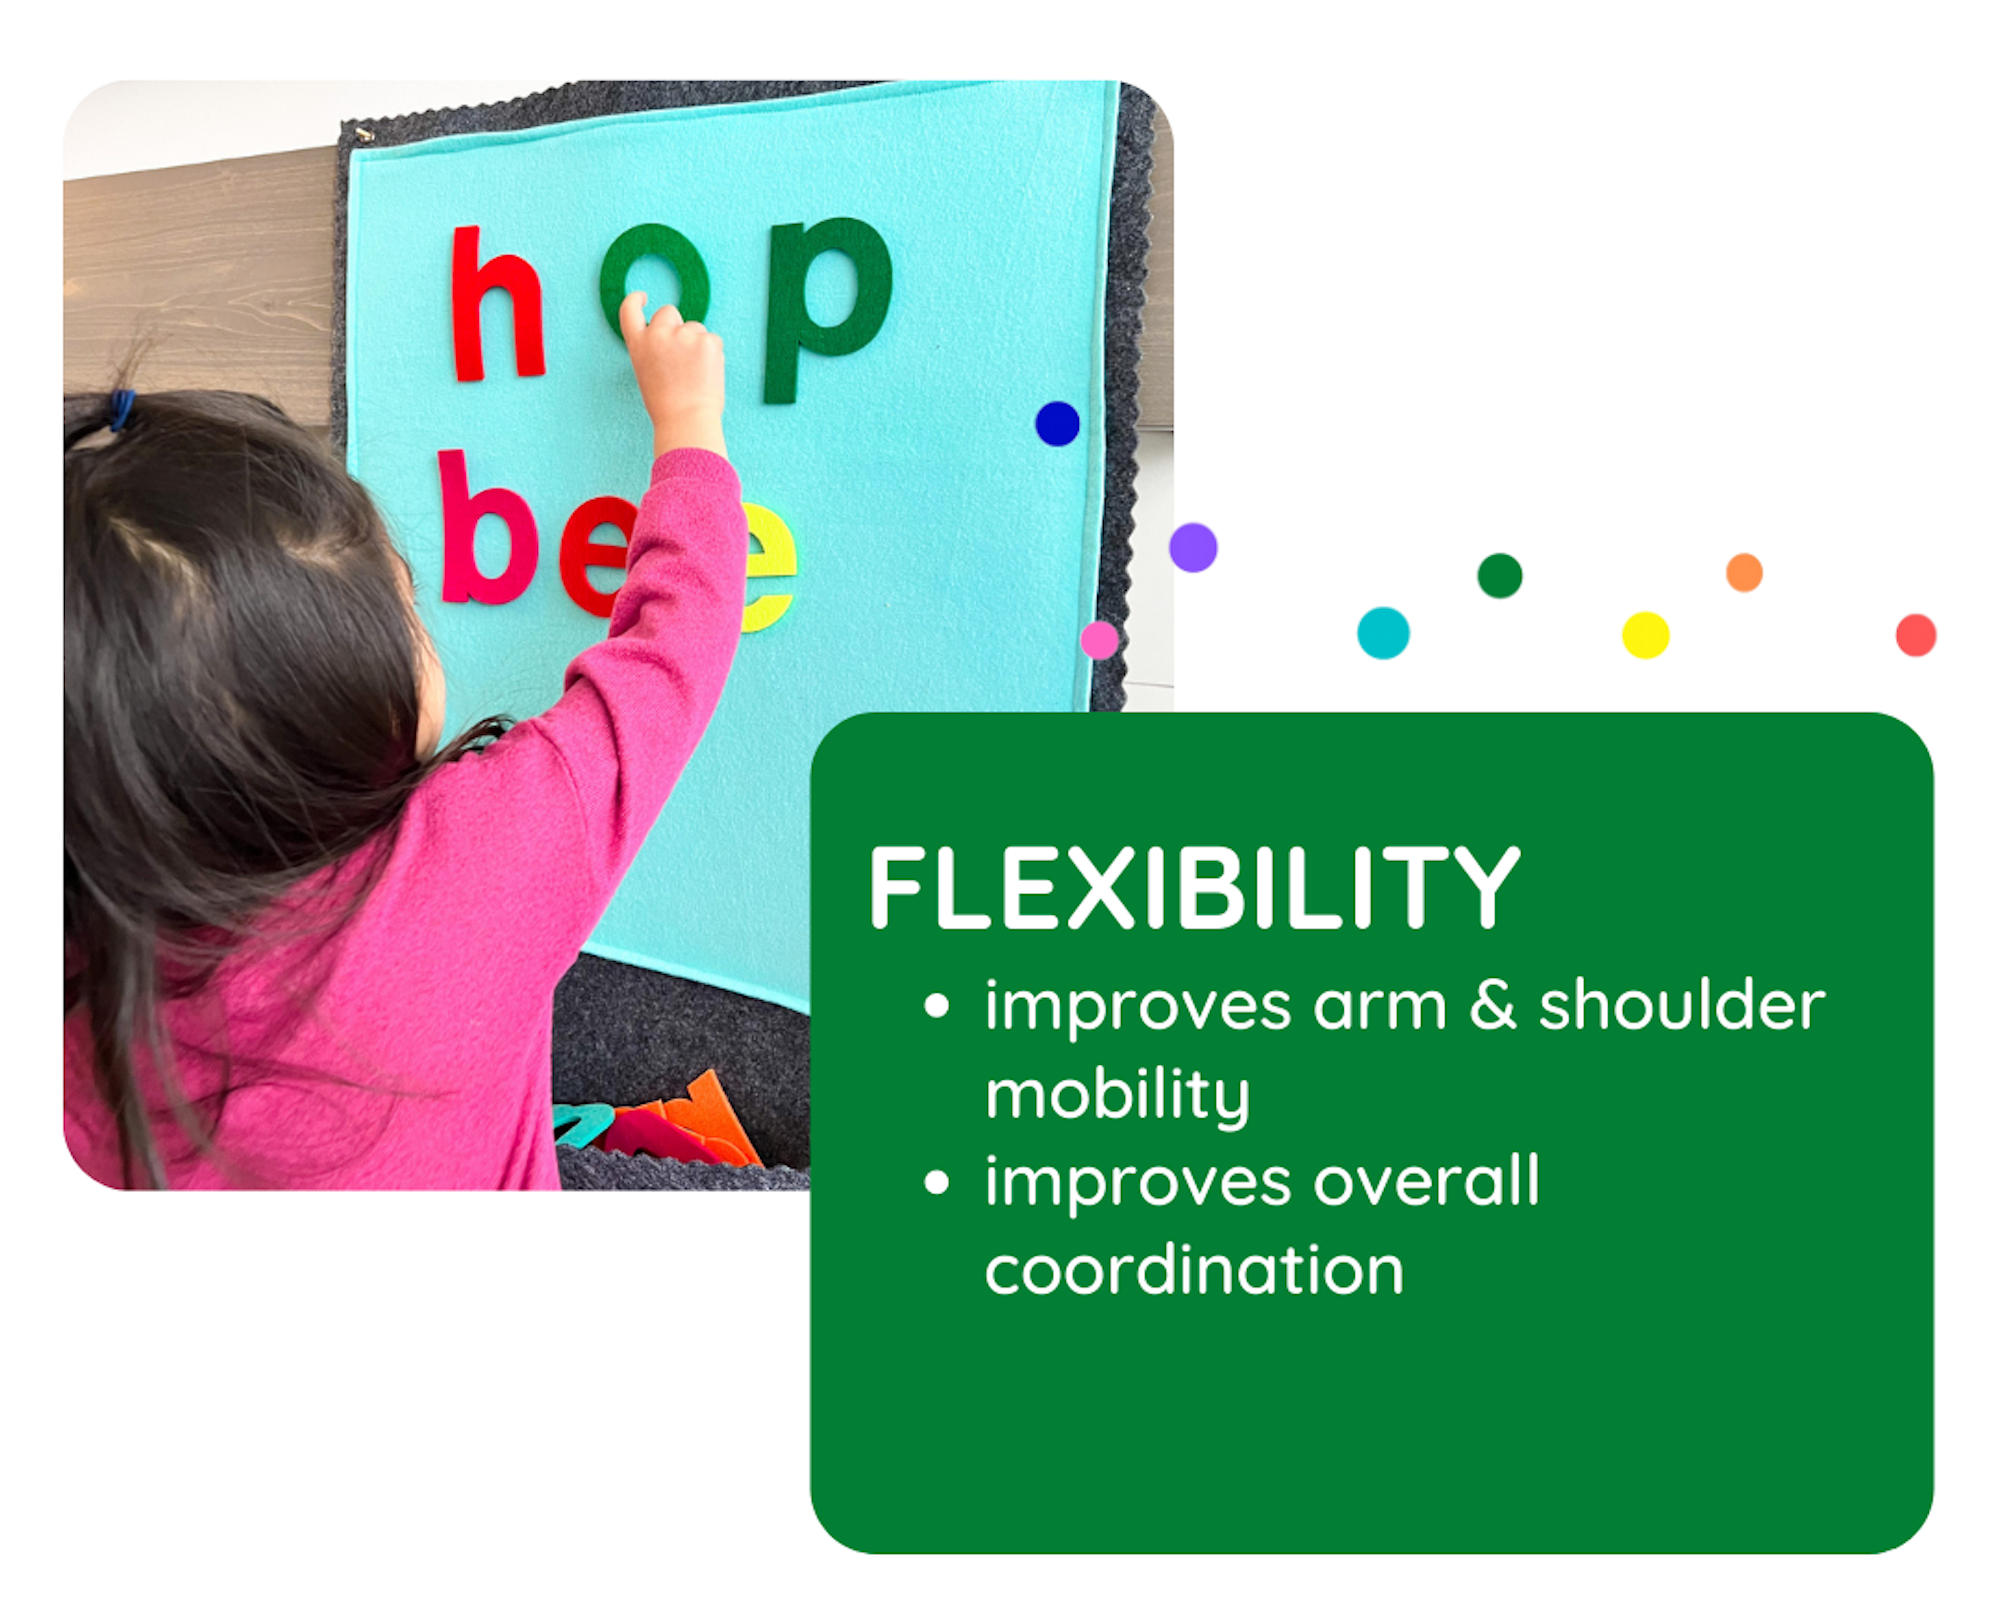 Vertical Play can improve flexibility and arm mobility in children